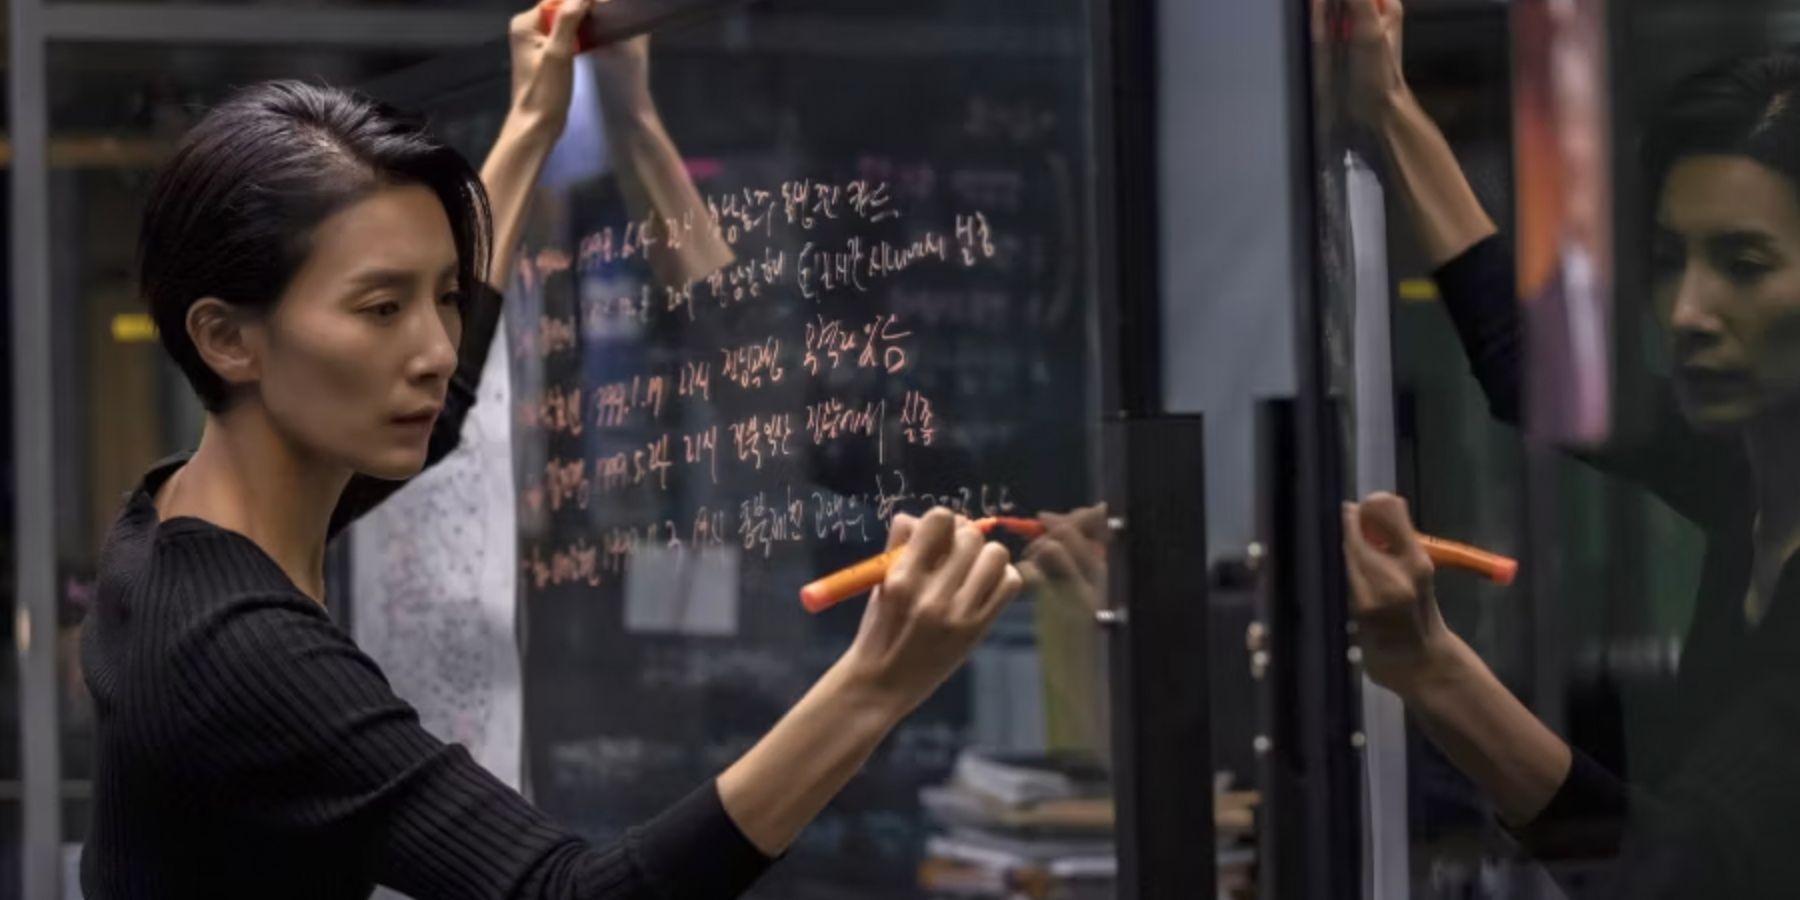 The detective writes notes on a clear dry erase board in Nobody Knows